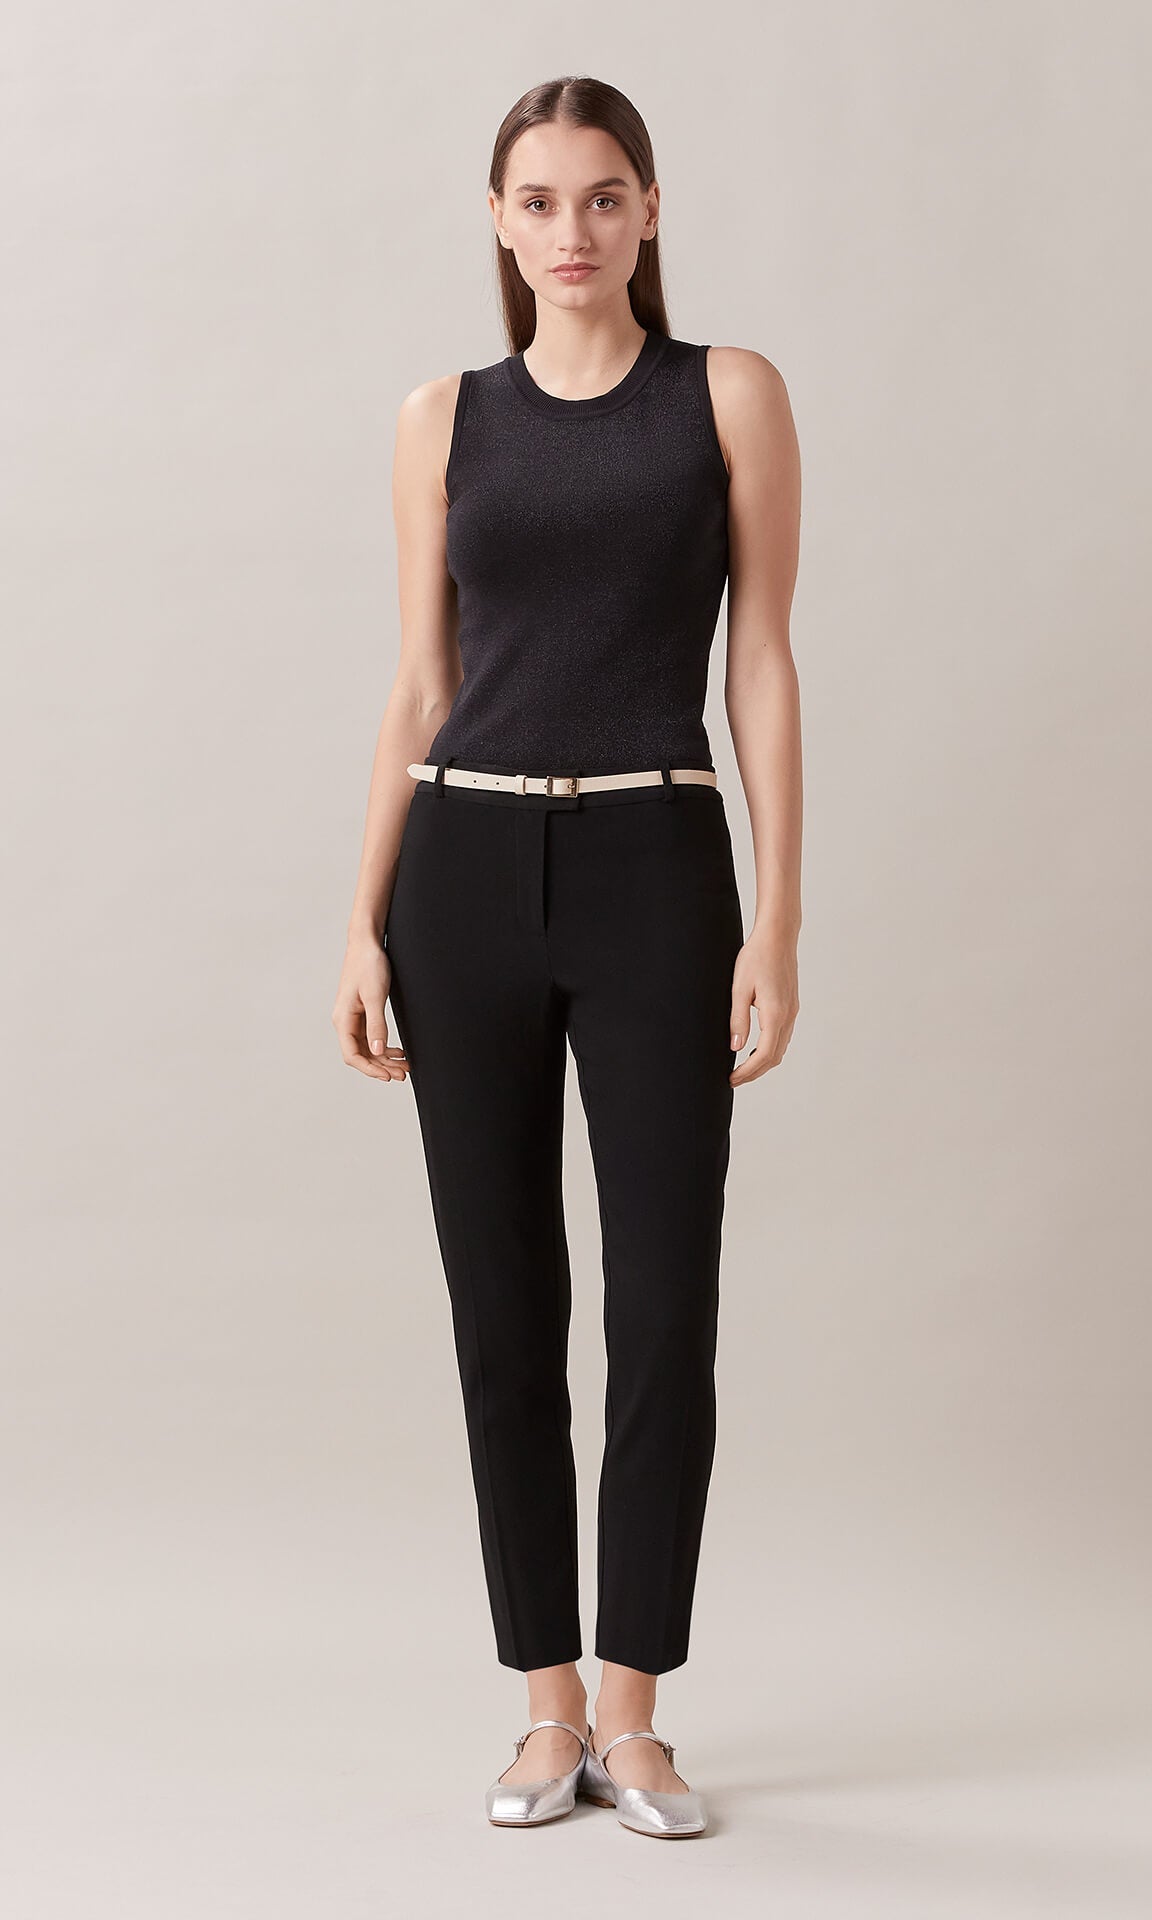 Womens Work Pants & Suit Pants  Black Tapered Pants Womens Trousers – Anna  Thomas